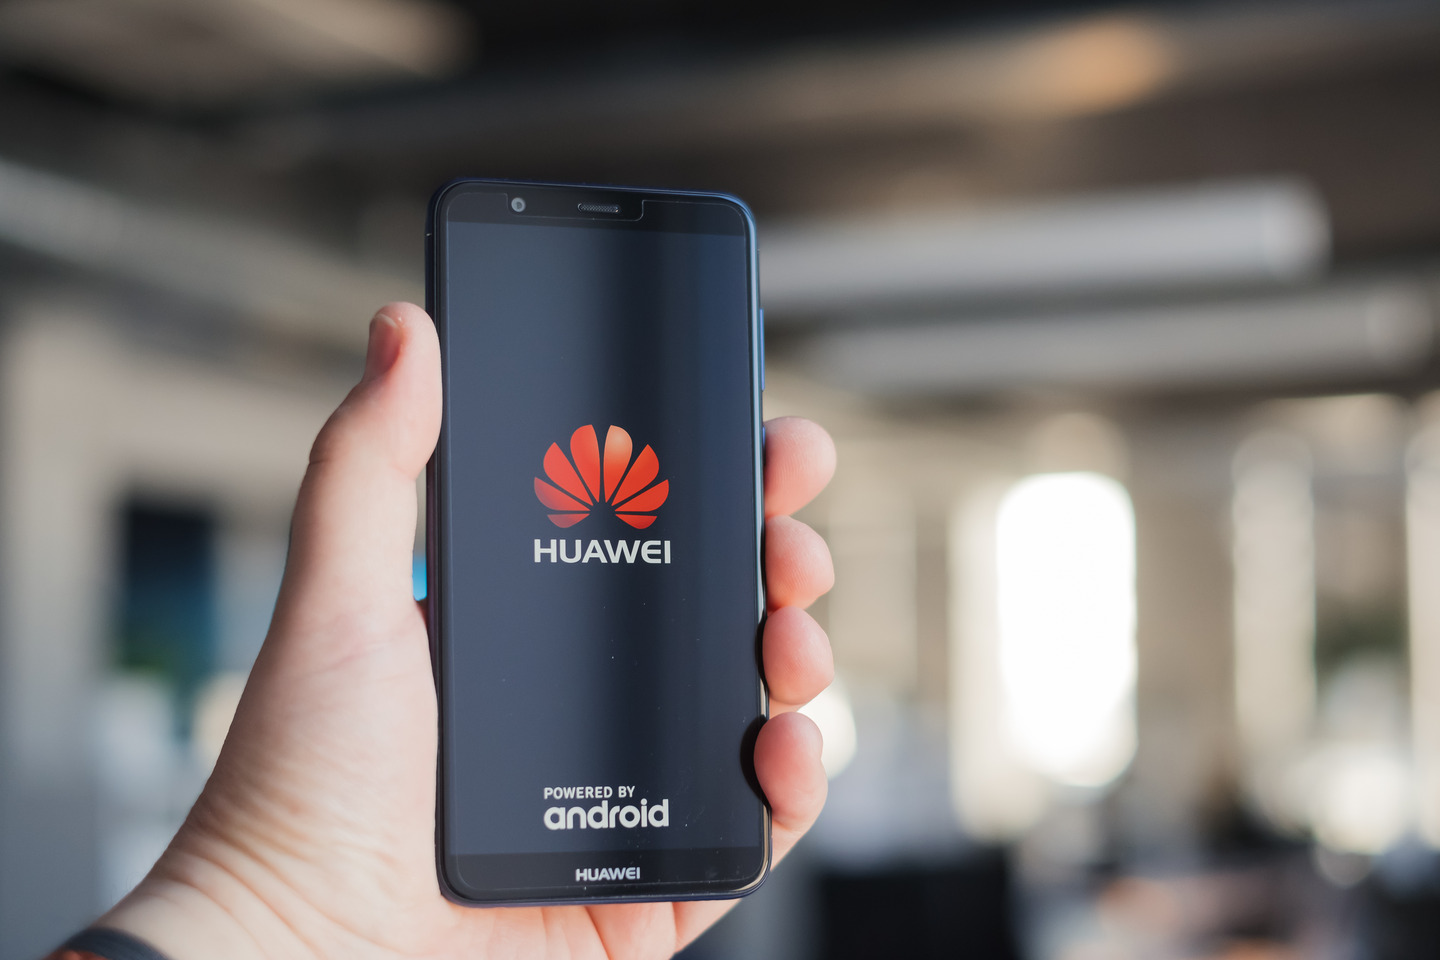 Could Huawei soon market a 5g smartphone?